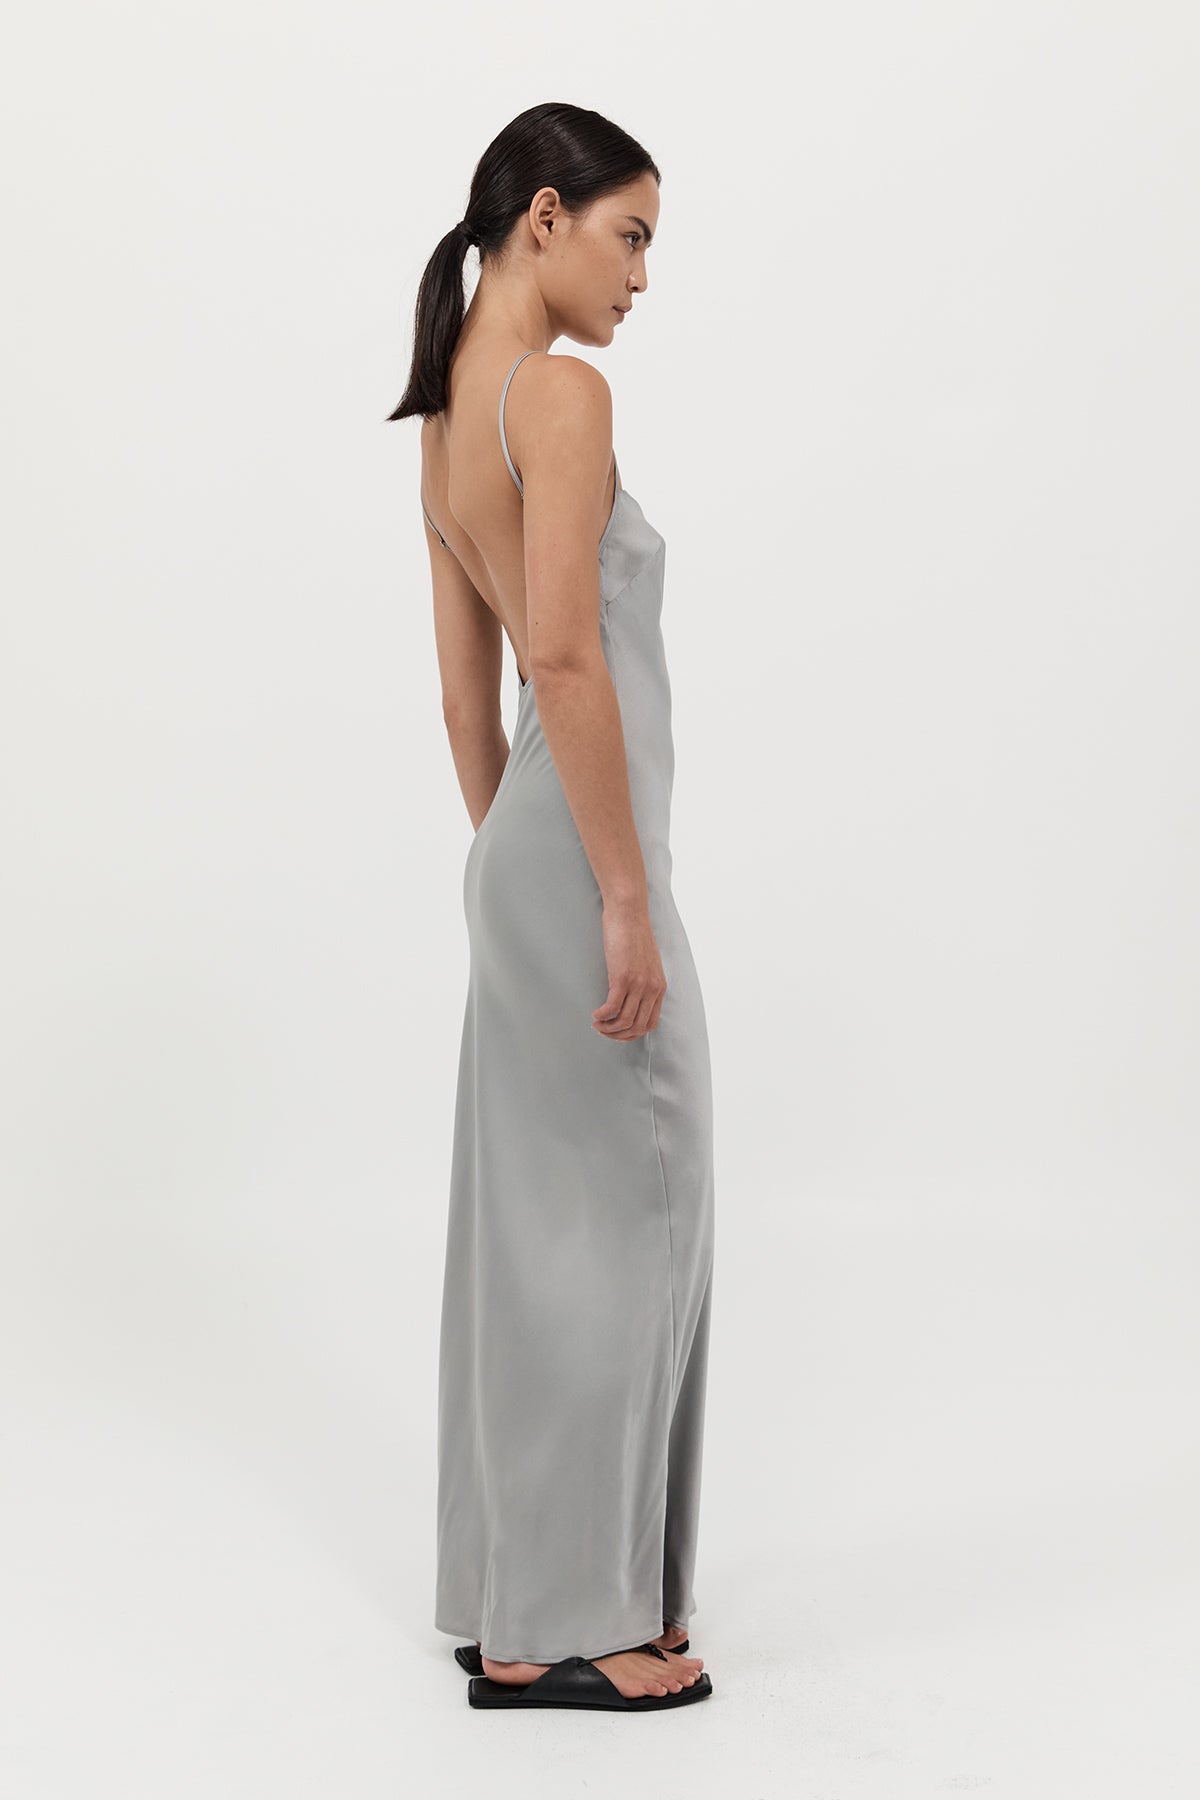 The St Agni Low Back Slip Dress in Silver available at The New Trend Australia